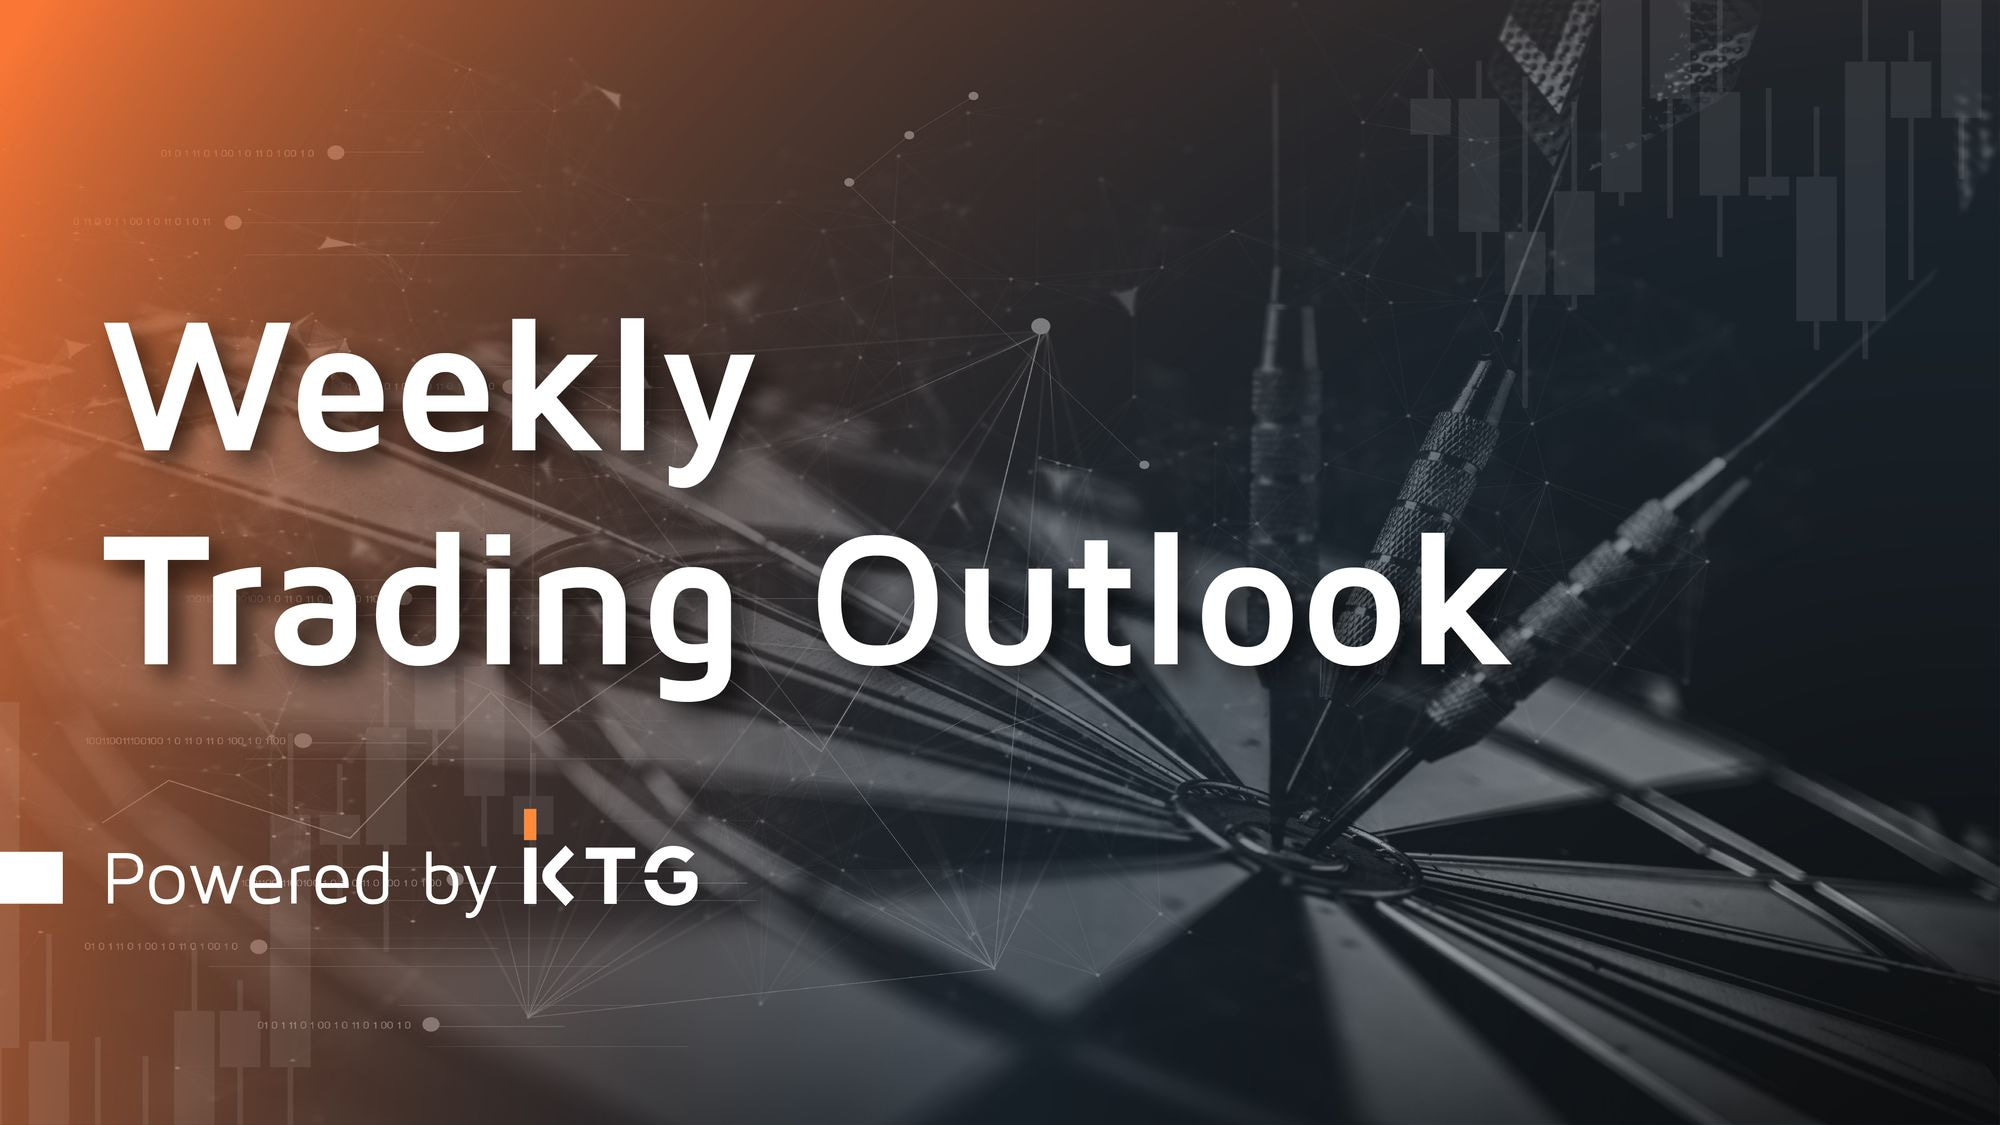 Time for a breakout #TradingOutlook - Powered by KTG